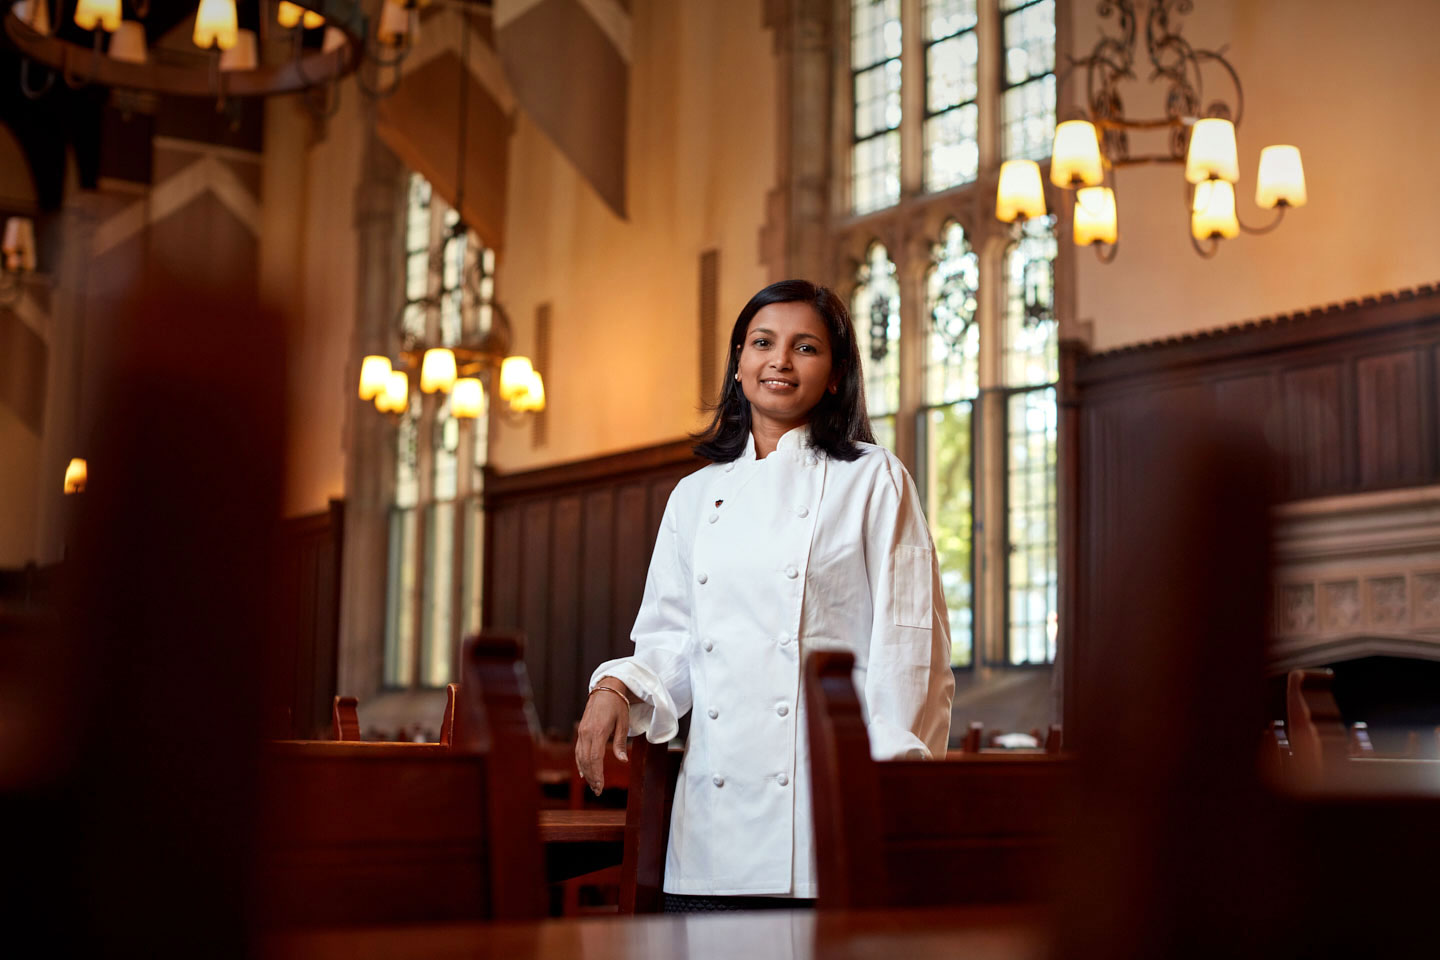 Smitha Haneef, Executive Director, Campus Dining, Princeton University. Rockefeller College Dining Hall. September, 2015. Click images to enlarge.